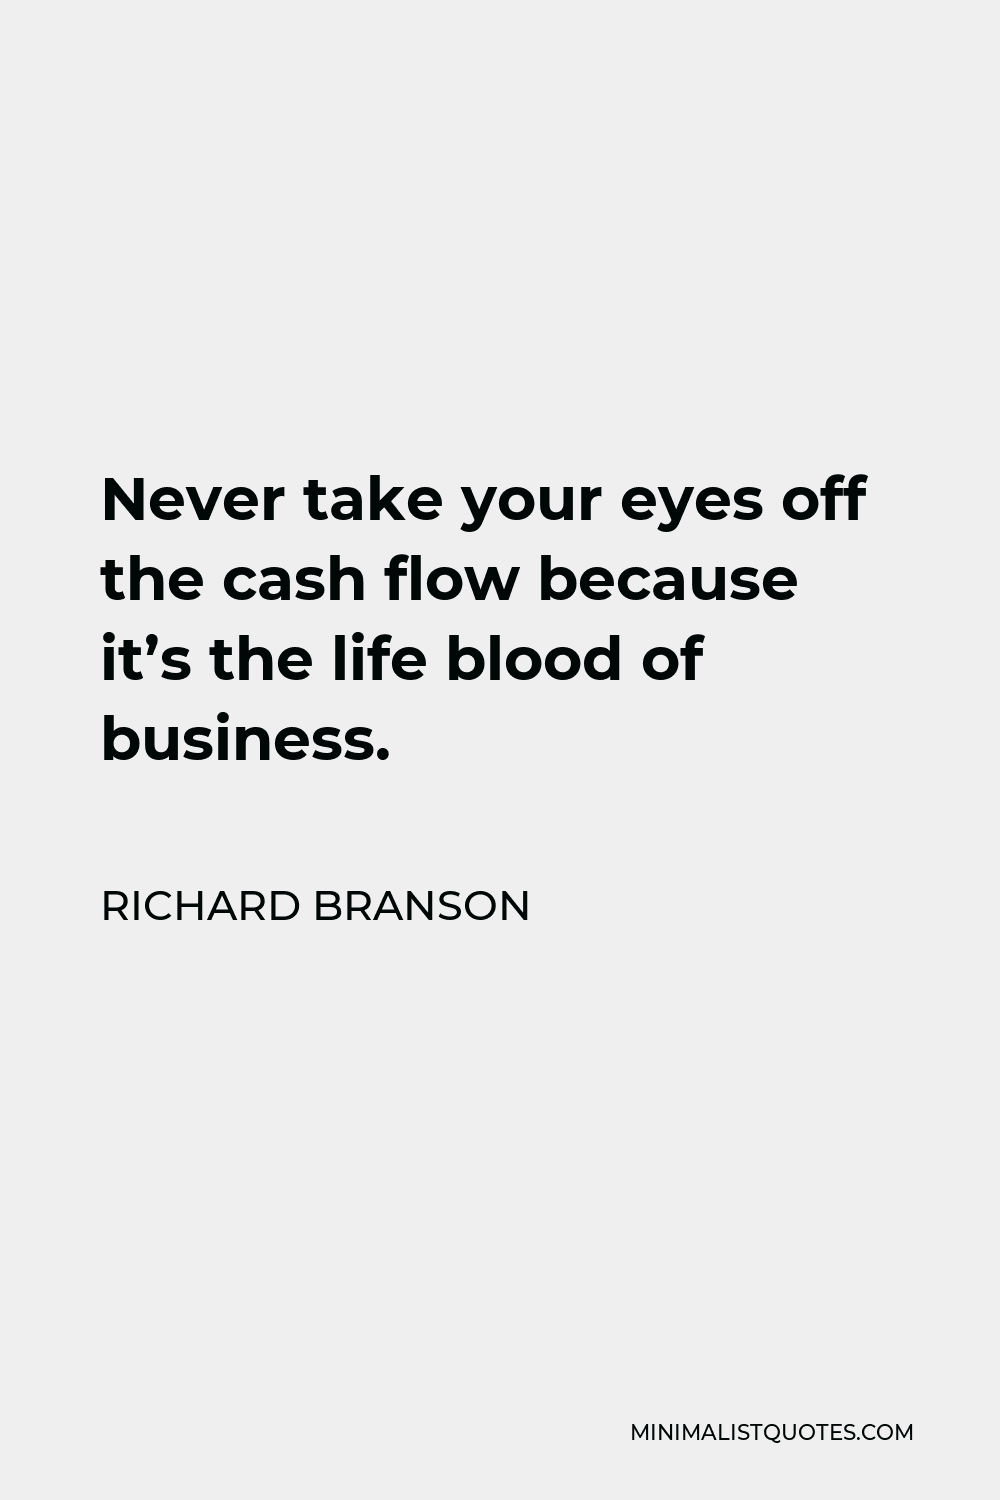 Richard Branson Quote - Never take your eyes off the cash flow because it’s the life blood of business.